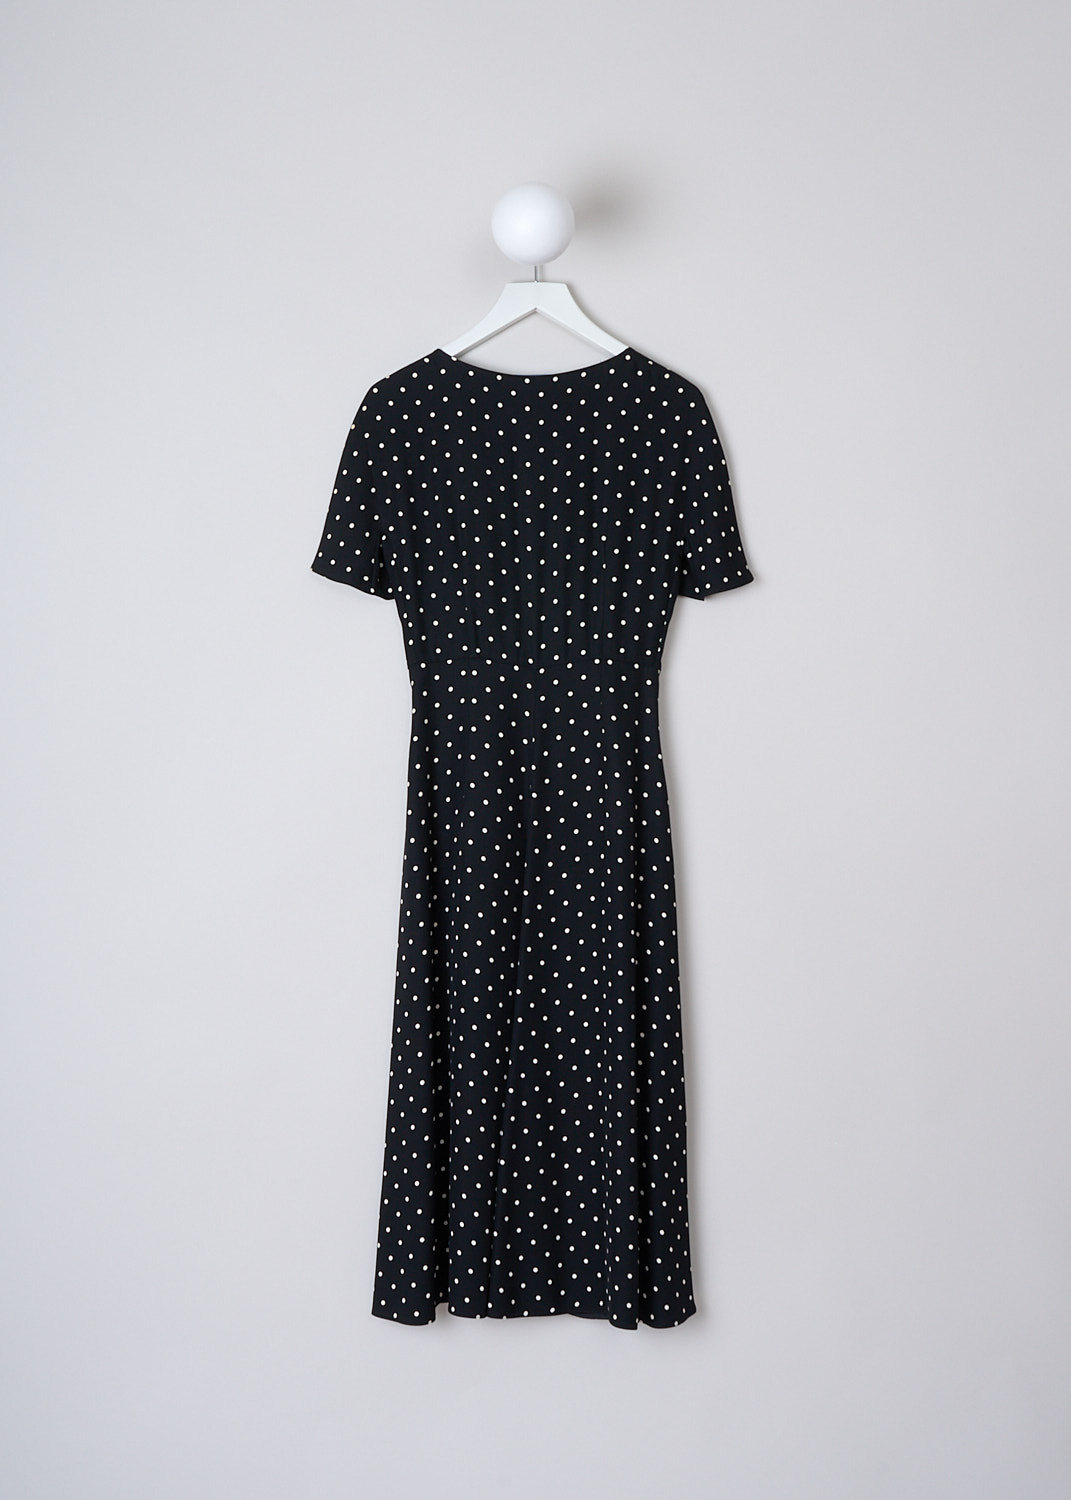 PRADA, BLACK MIDI DRESS WITH WHITE POLKA DOT PRINT, SABLE_POIS_ABITO_P3D14_1YH2_F057Z,  Black, White, Print, Back, This short sleeve midi dress has a black base color with a small white polka dot print. The dress has a V-neckline. In the front, a two-way zip runs down the length of the dress with gathered pleats along the zipper. Below the buste, two ties can be used to cinch in the dress. The dress has a straight hemline.
